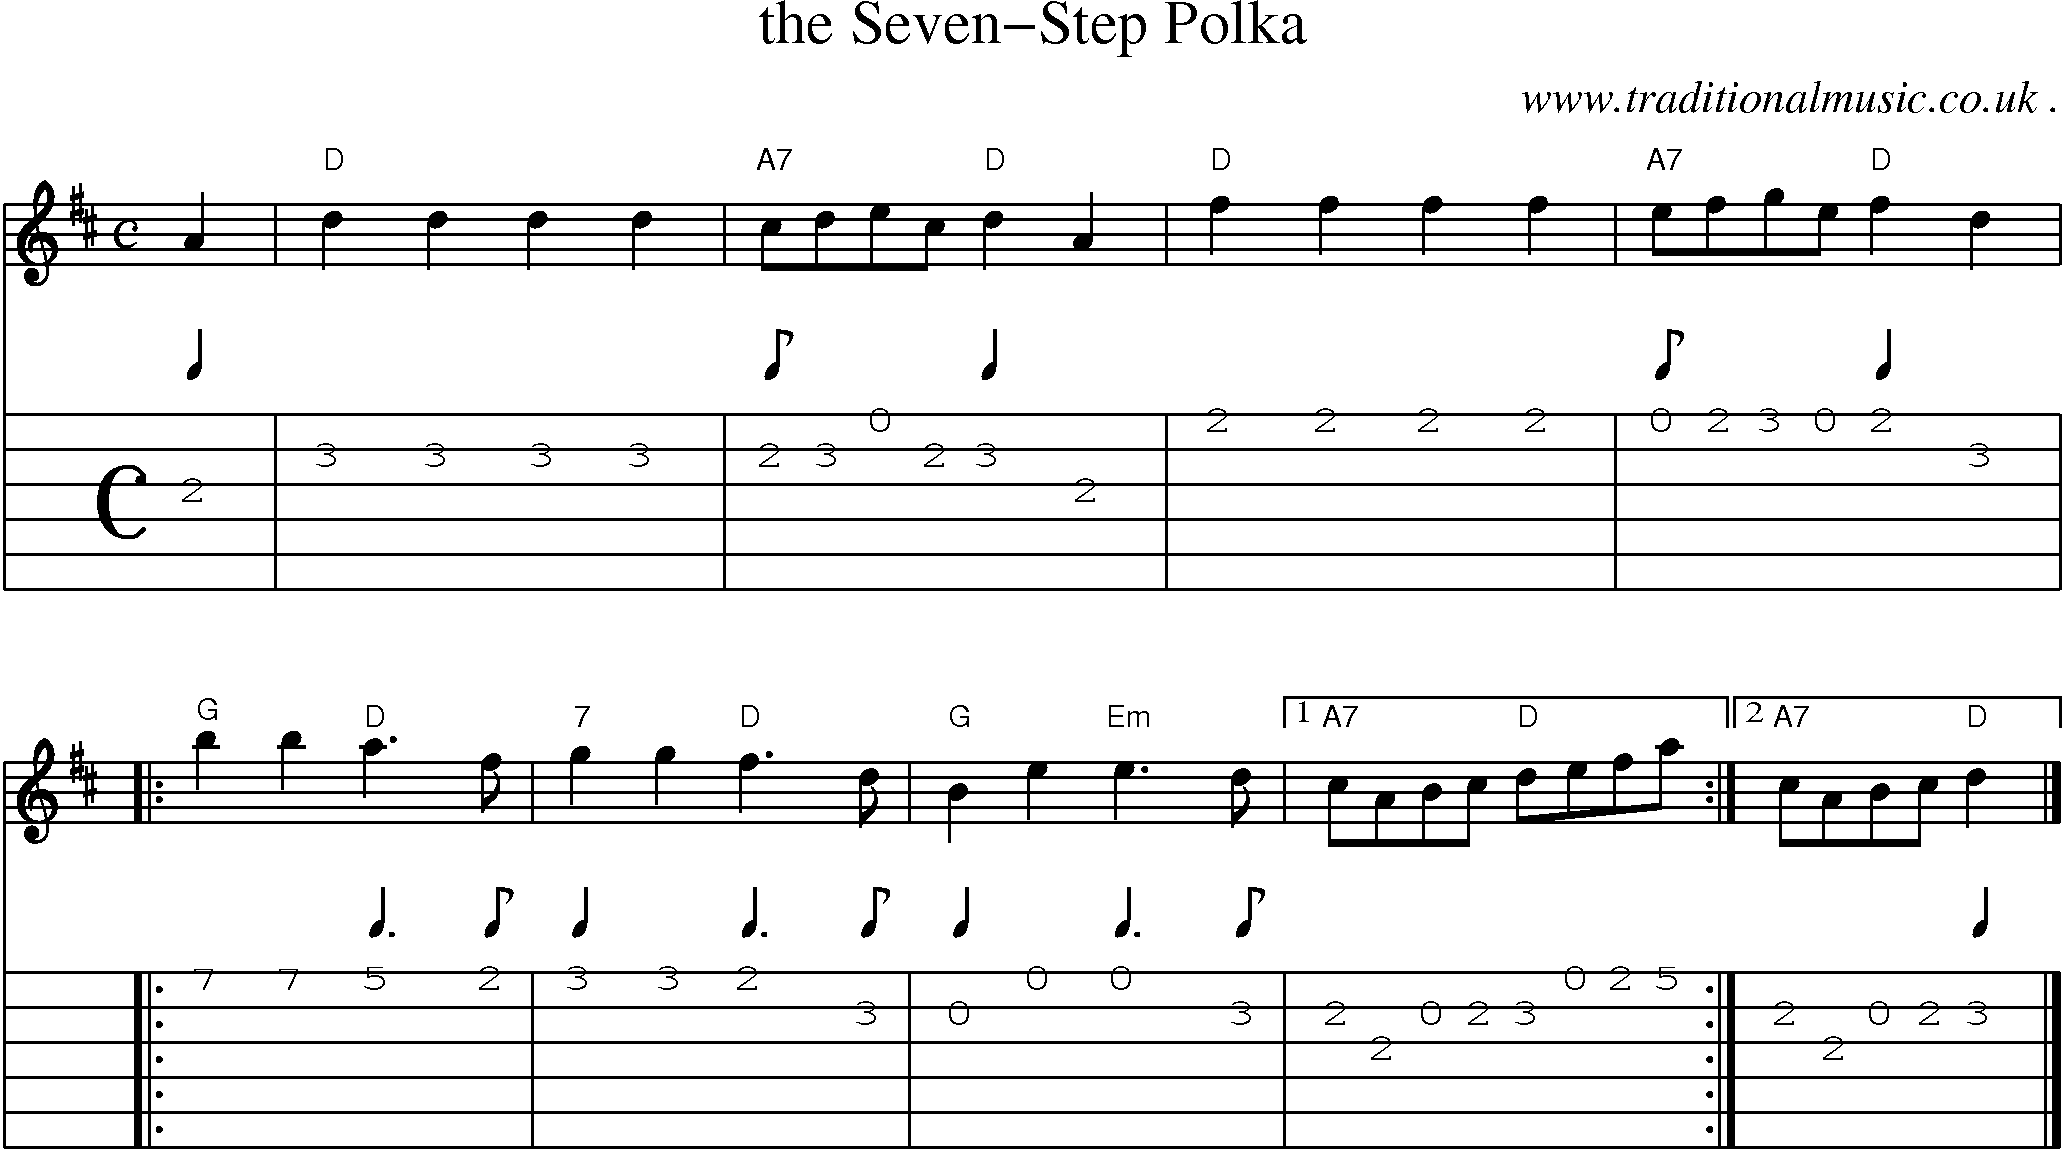 Sheet-music  score, Chords and Guitar Tabs for The Seven-step Polka